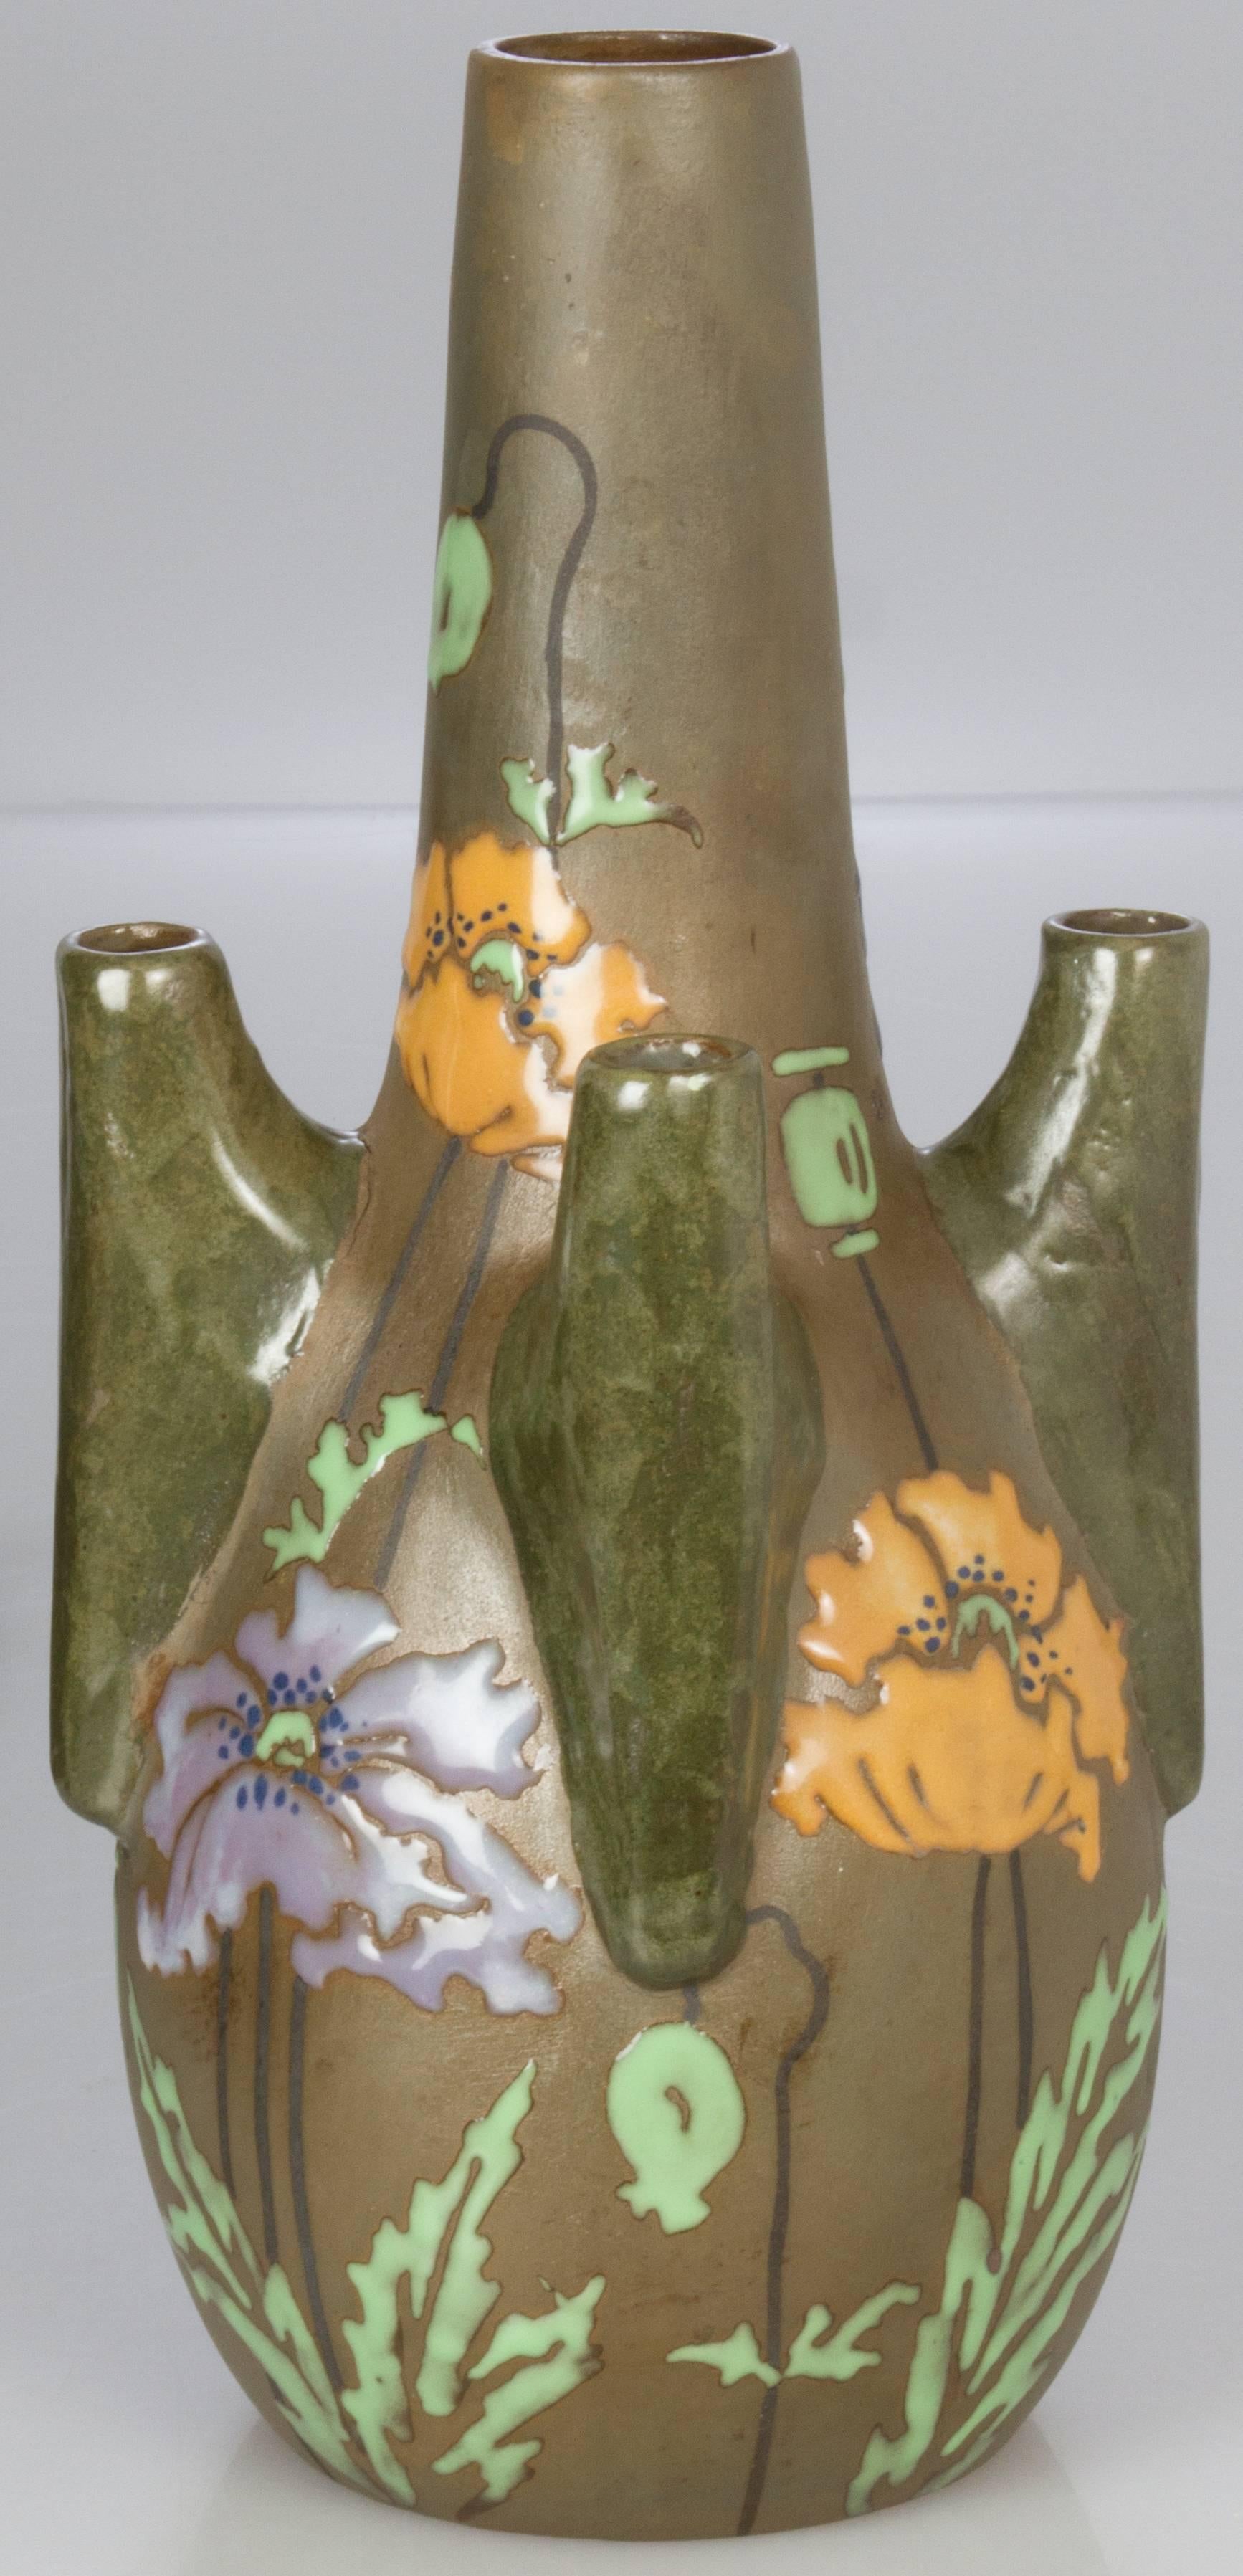 This is an unusually shaped vase with beautifully painted poppies, having four vaselets.